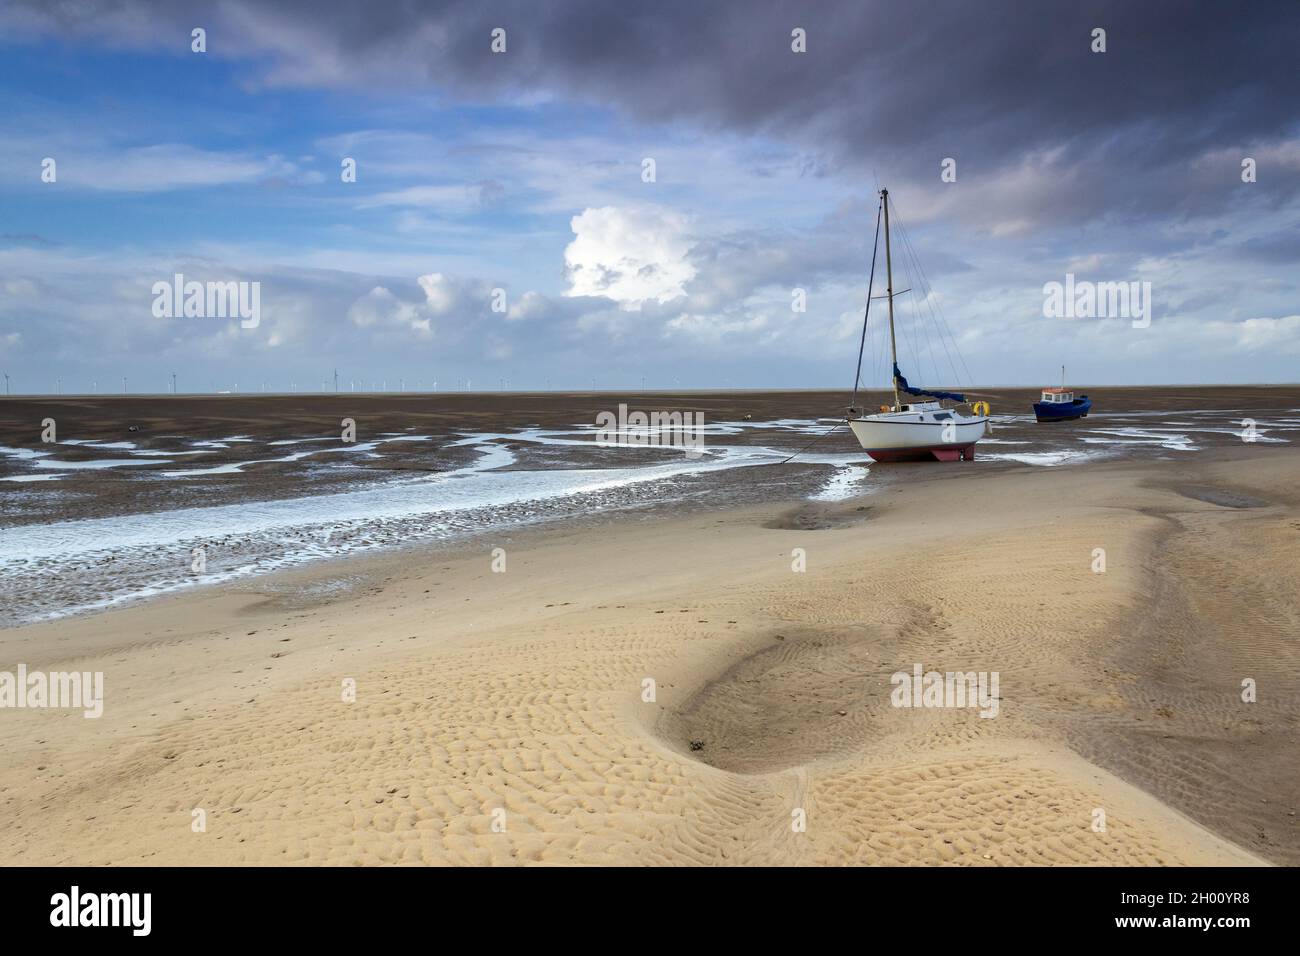 Meols, UK: Fishing boat moored on the beach at low tide on the North Wirral coastline. Stock Photo